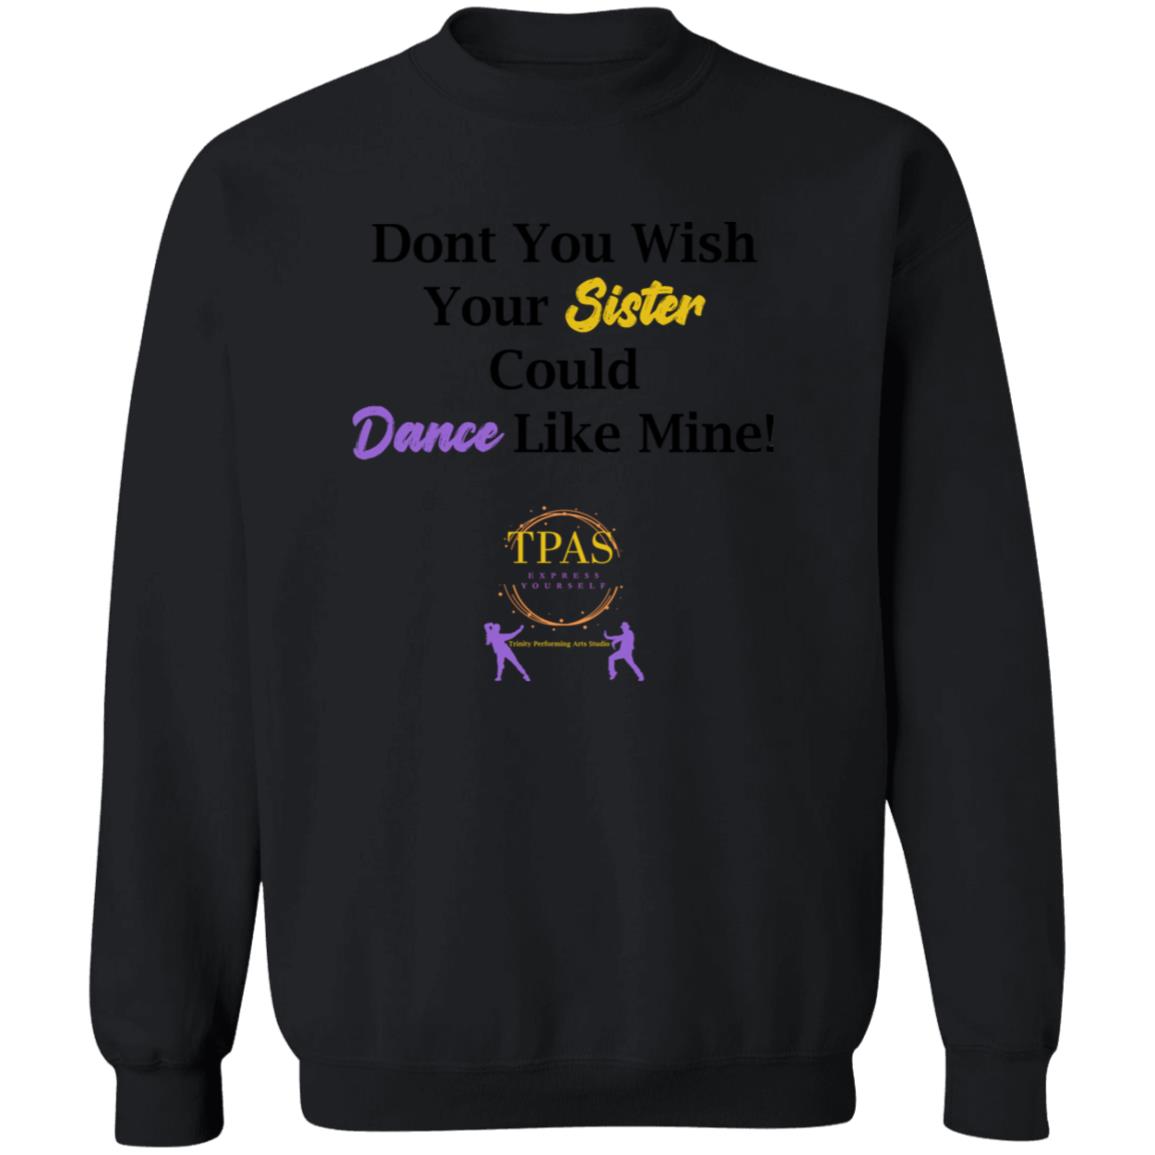 TPAS Wish Your Sister Could Dance Like Mine Crewneck Pullover Sweatshirt